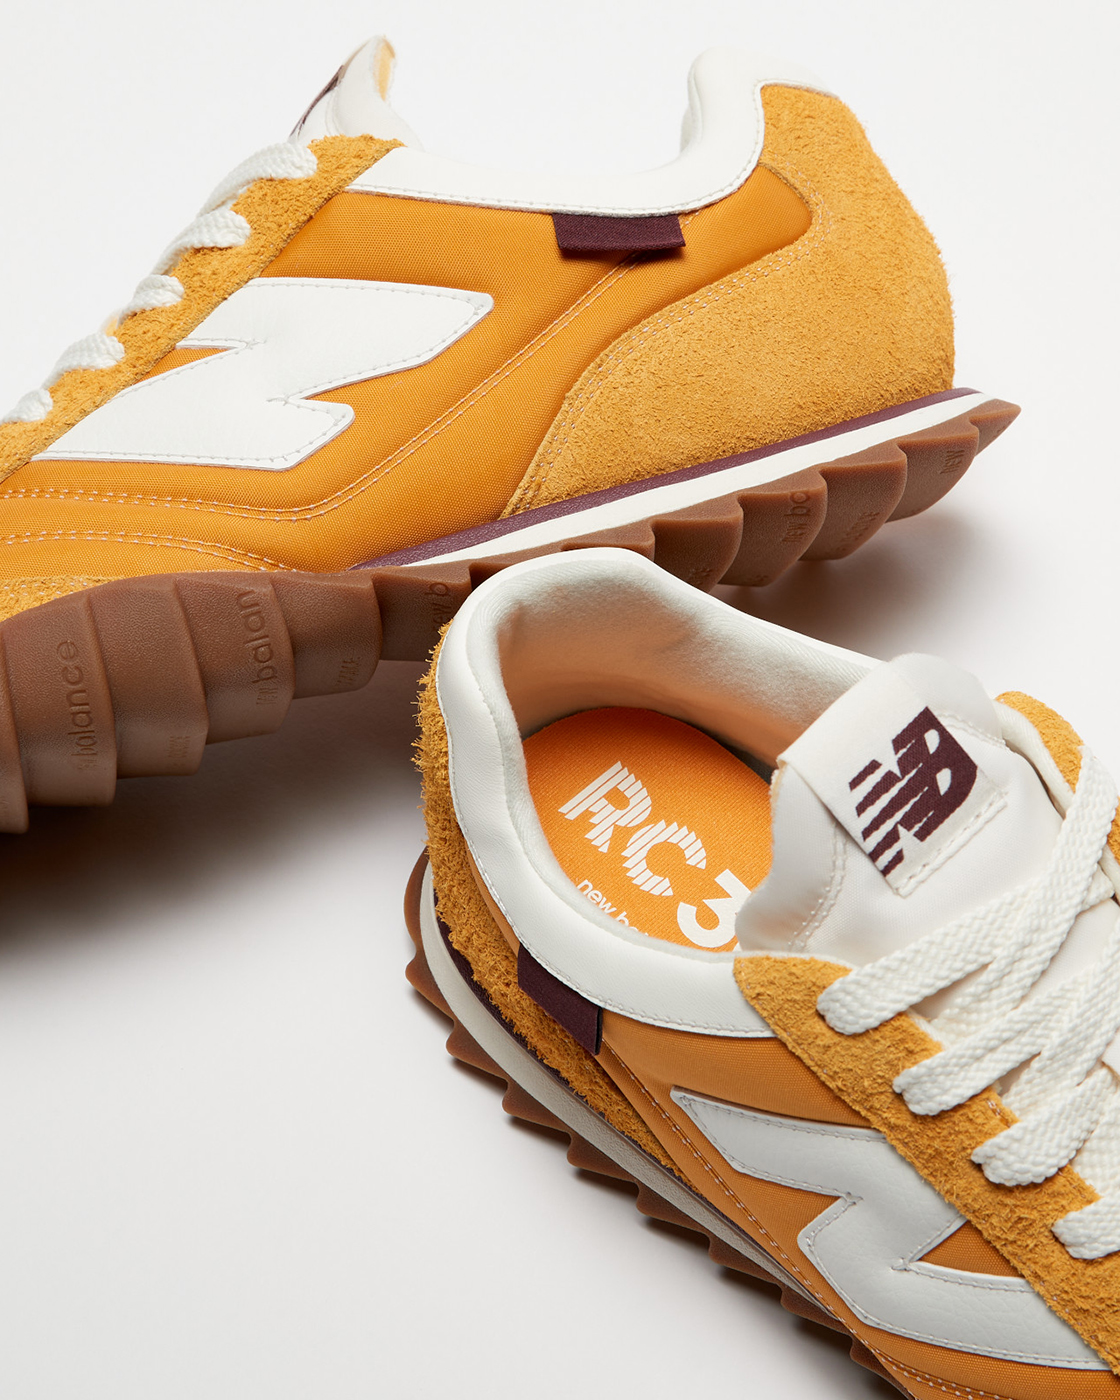 Donald New Balance RC30 Release Date, Price